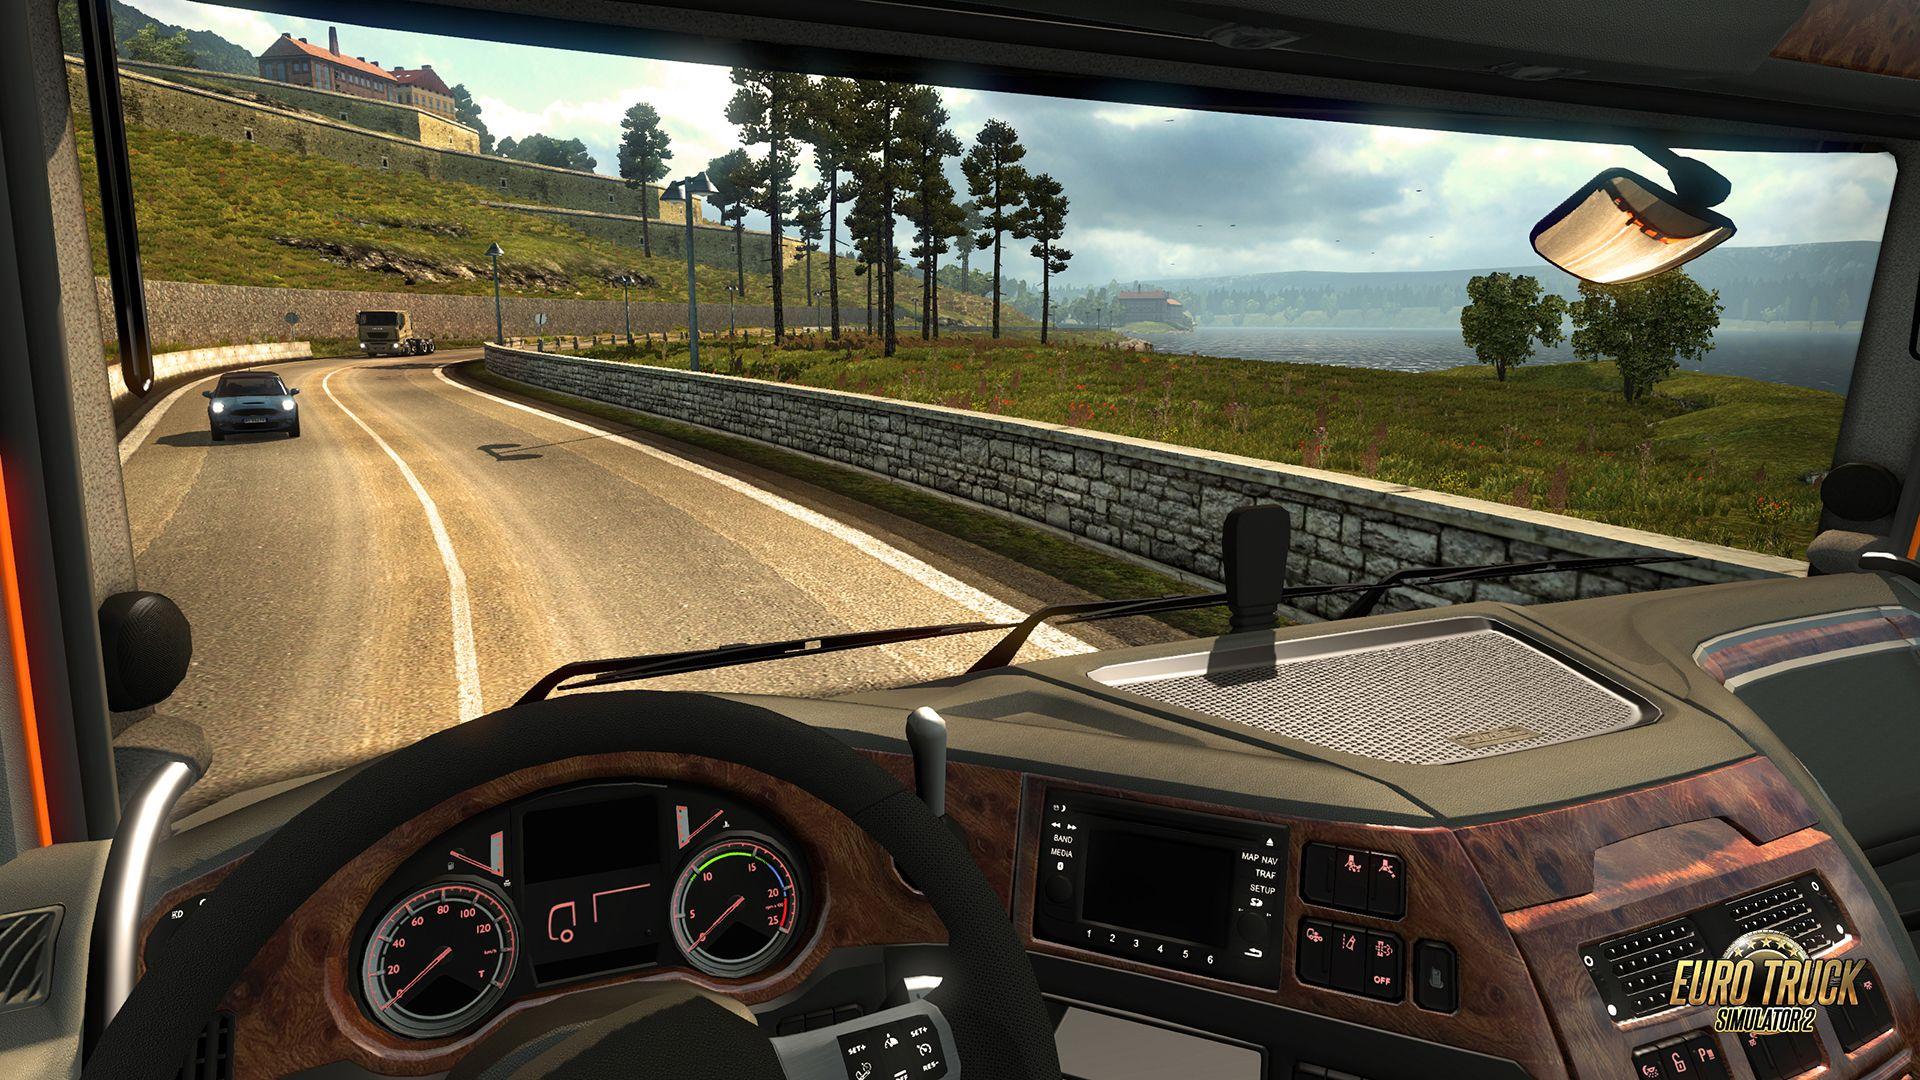 How 'Euro Truck Simulator 2' May Be The Most Realistic VR Driving Game